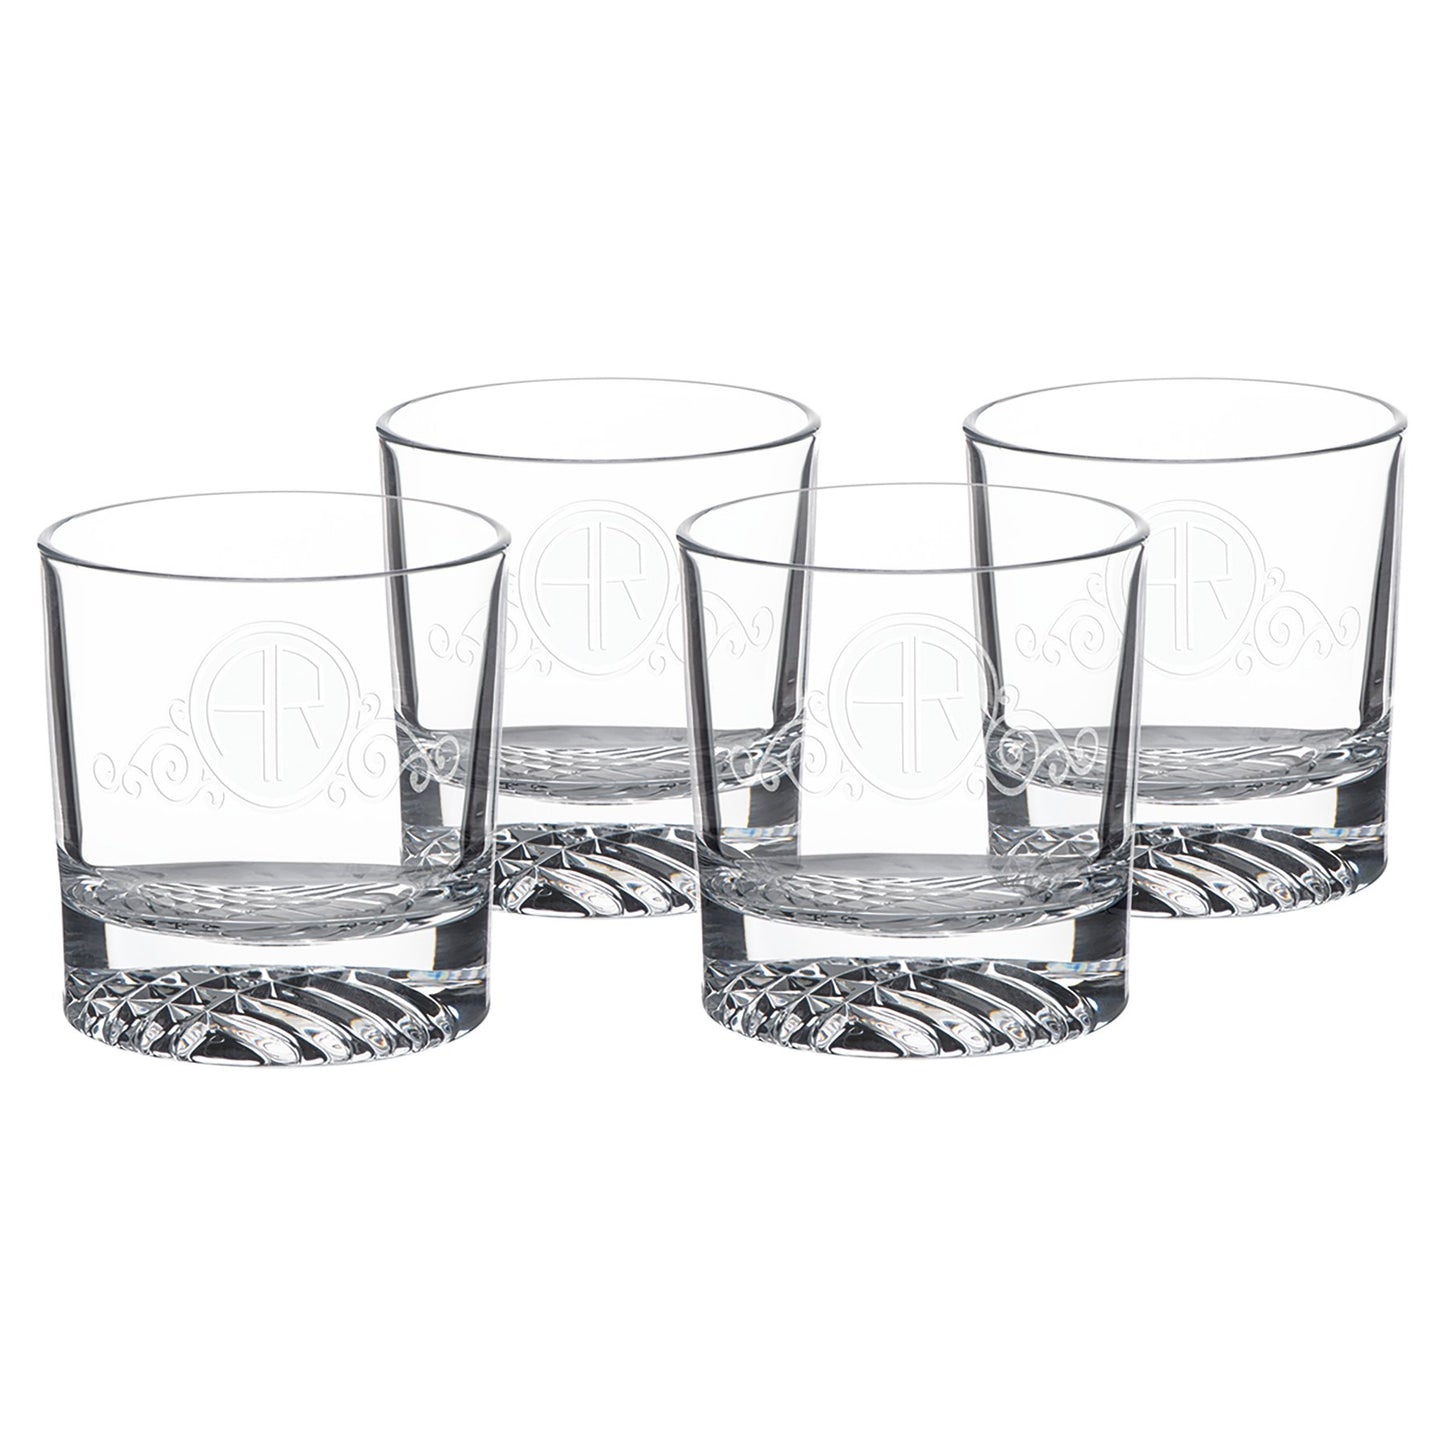 Personalized Criss-Cross Decanter and Glasses Set - Etchified-Polar Camel®-DCS403